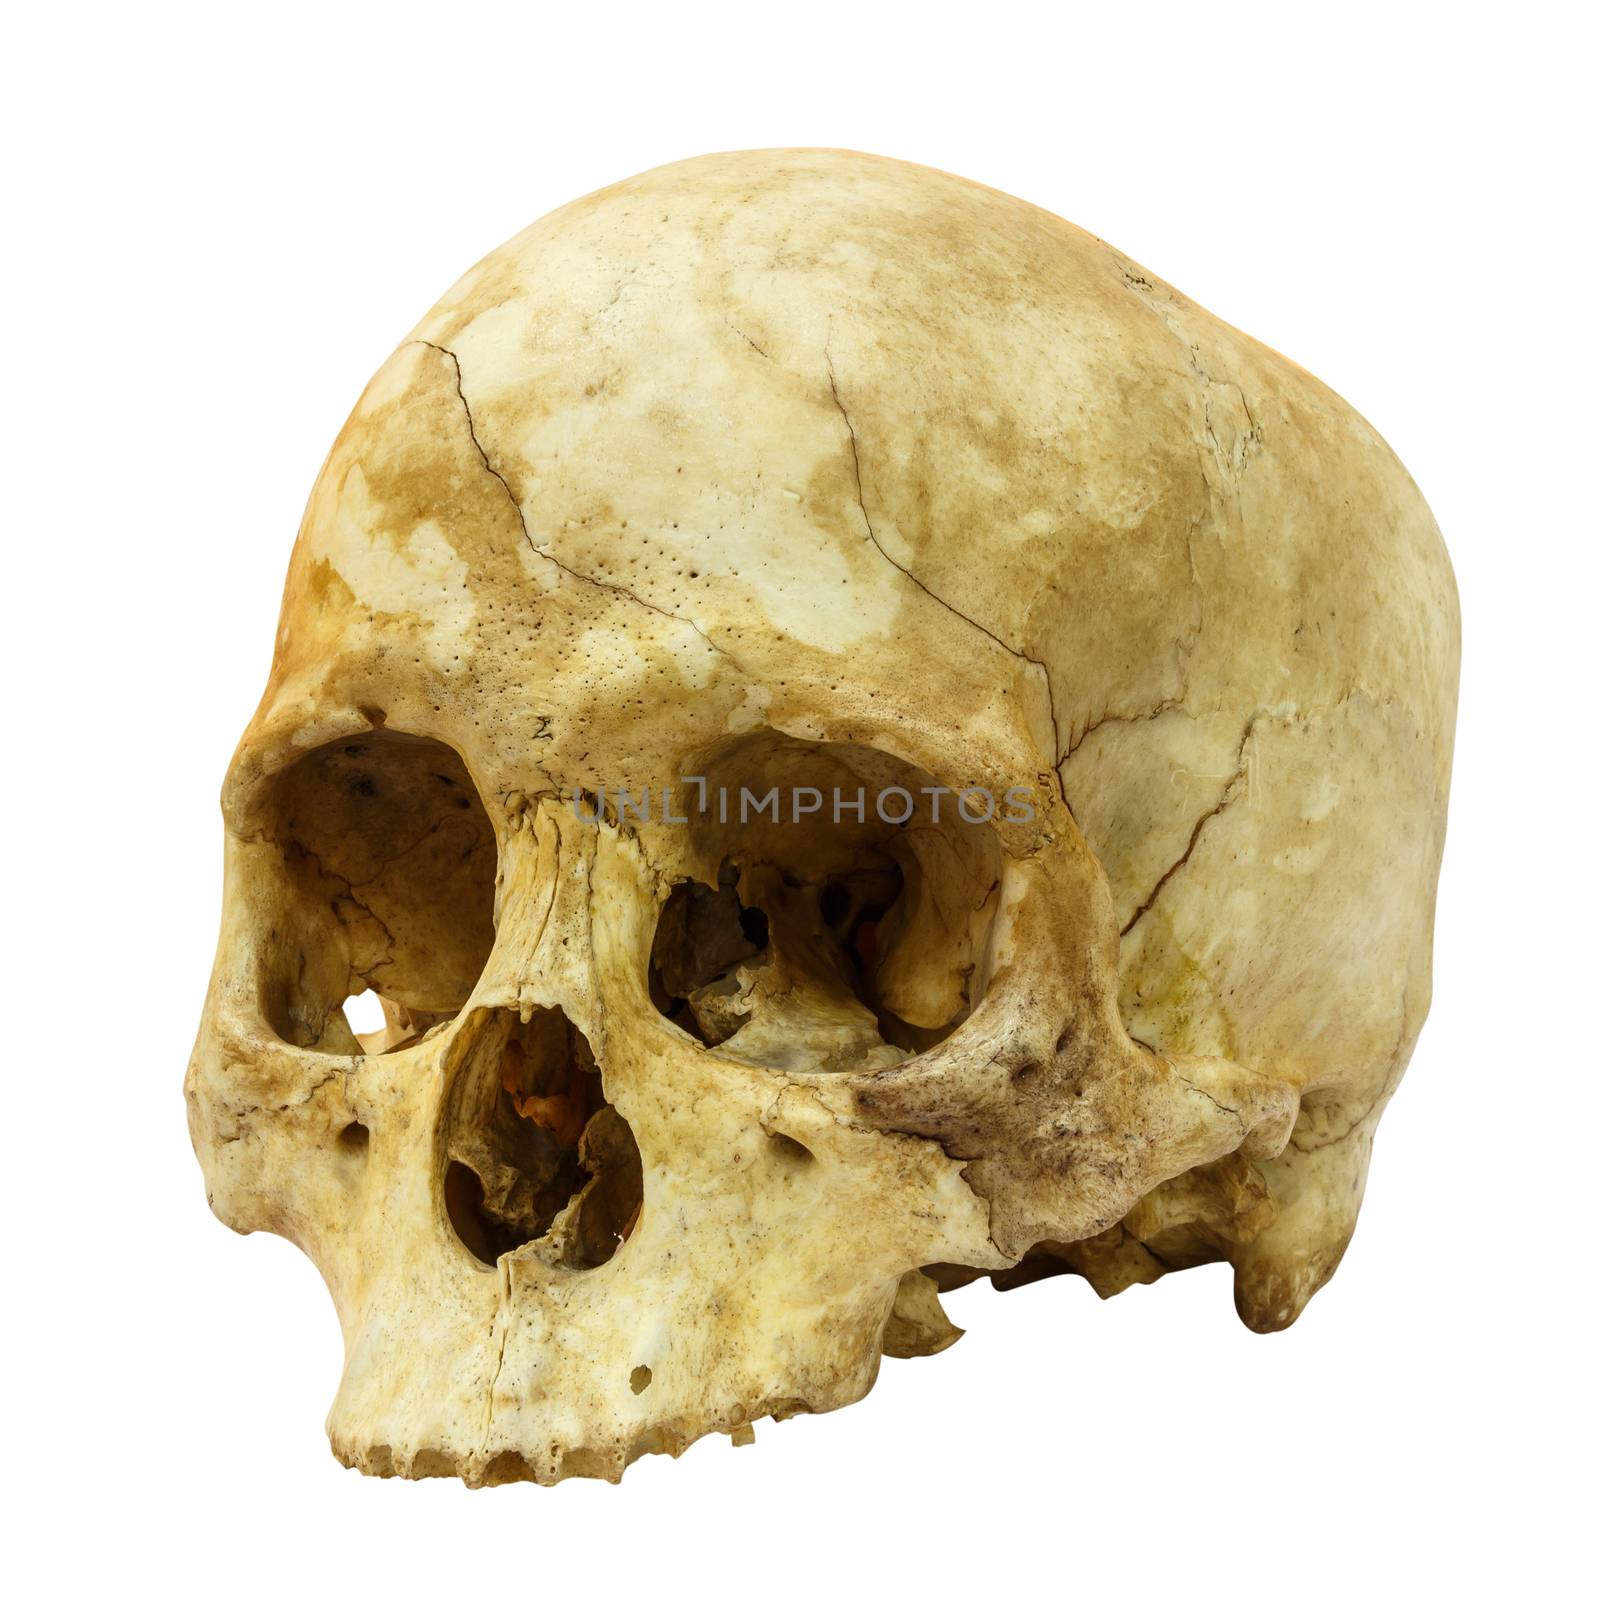 Human Skull Fracture(side) (Mongoloid,Asian) on isolated background